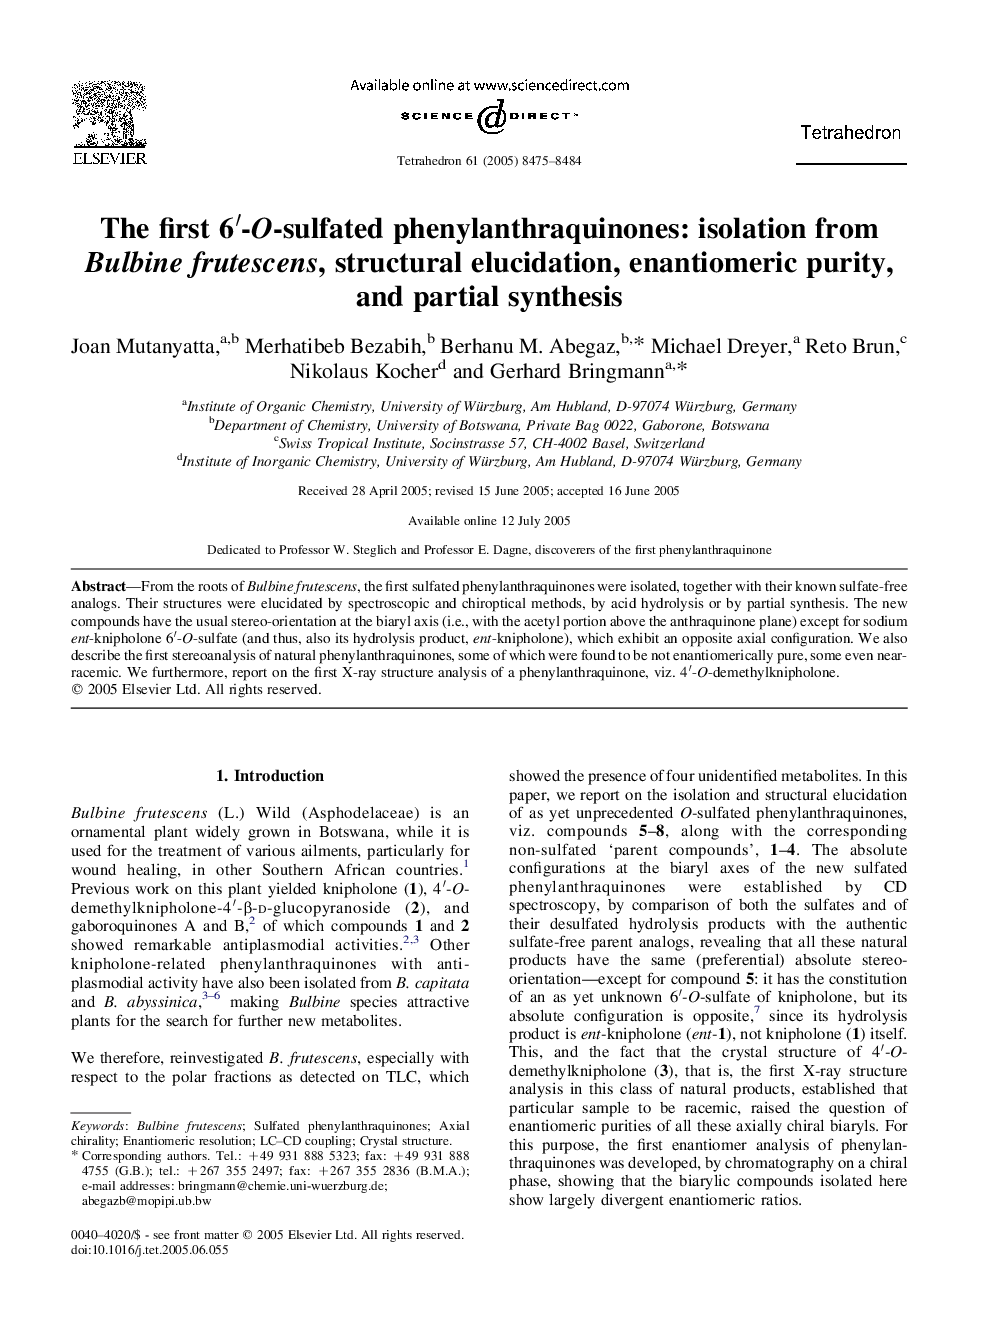 The first 6â²-O-sulfated phenylanthraquinones: isolation from Bulbine frutescens, structural elucidation, enantiomeric purity, and partial synthesis